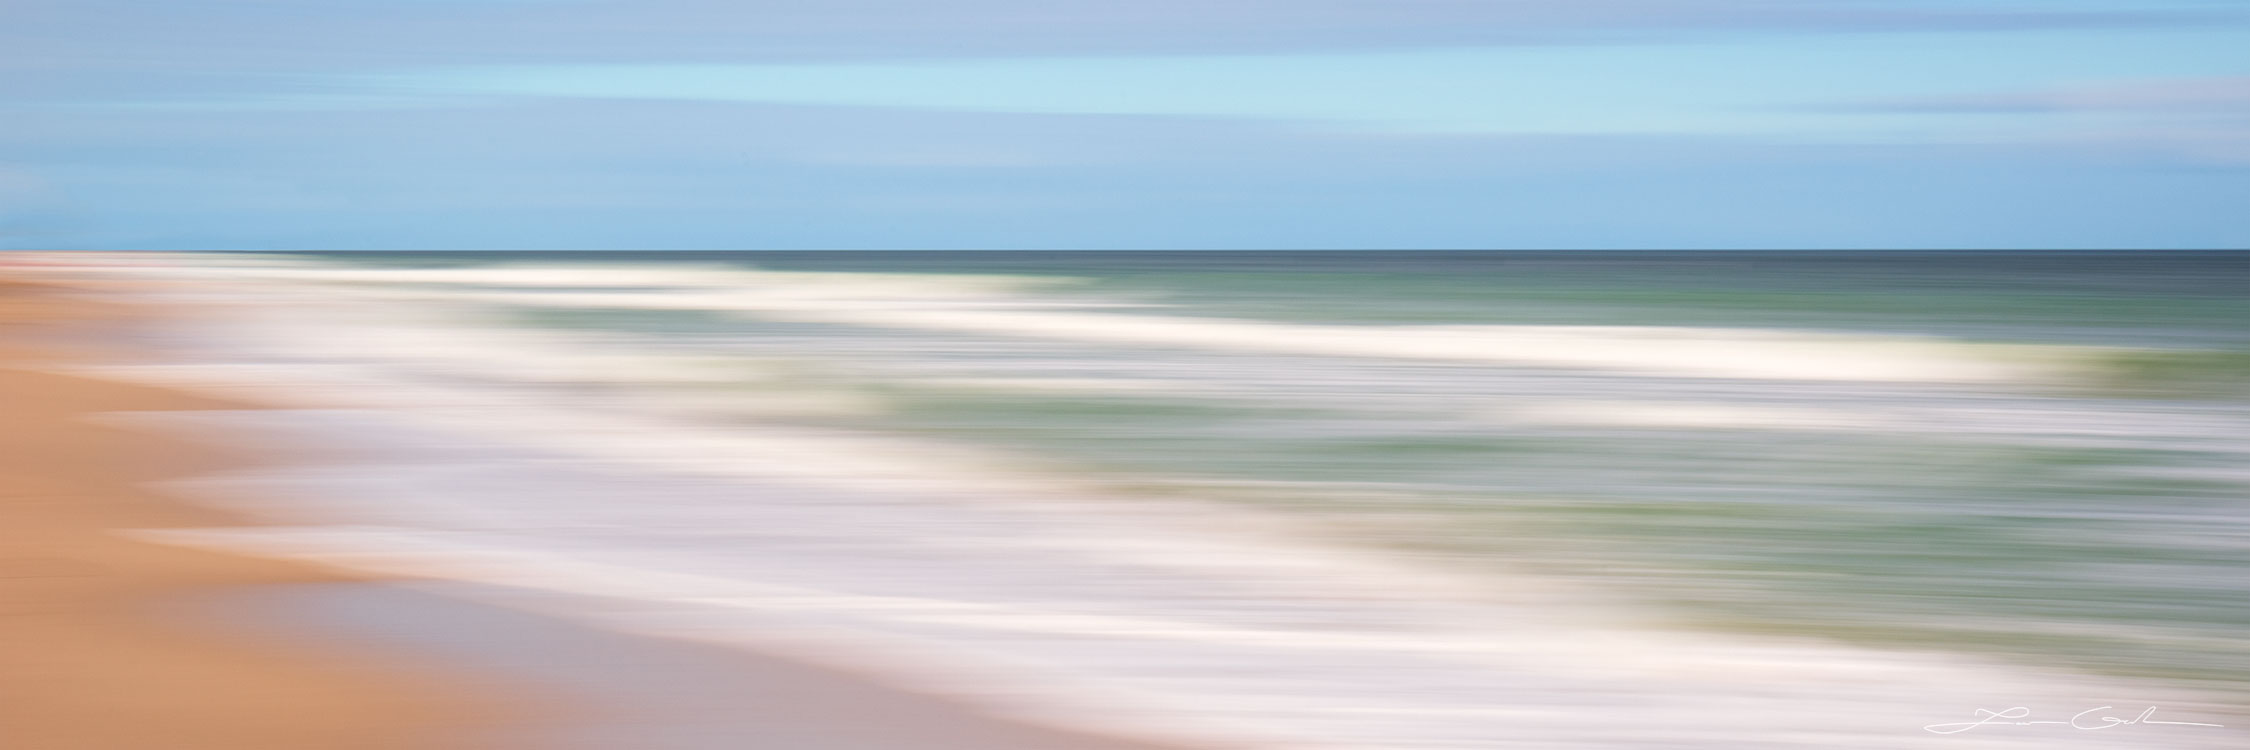 An ocean beach abstract panorama with white waves and blue skies - Gintchin Fine Art